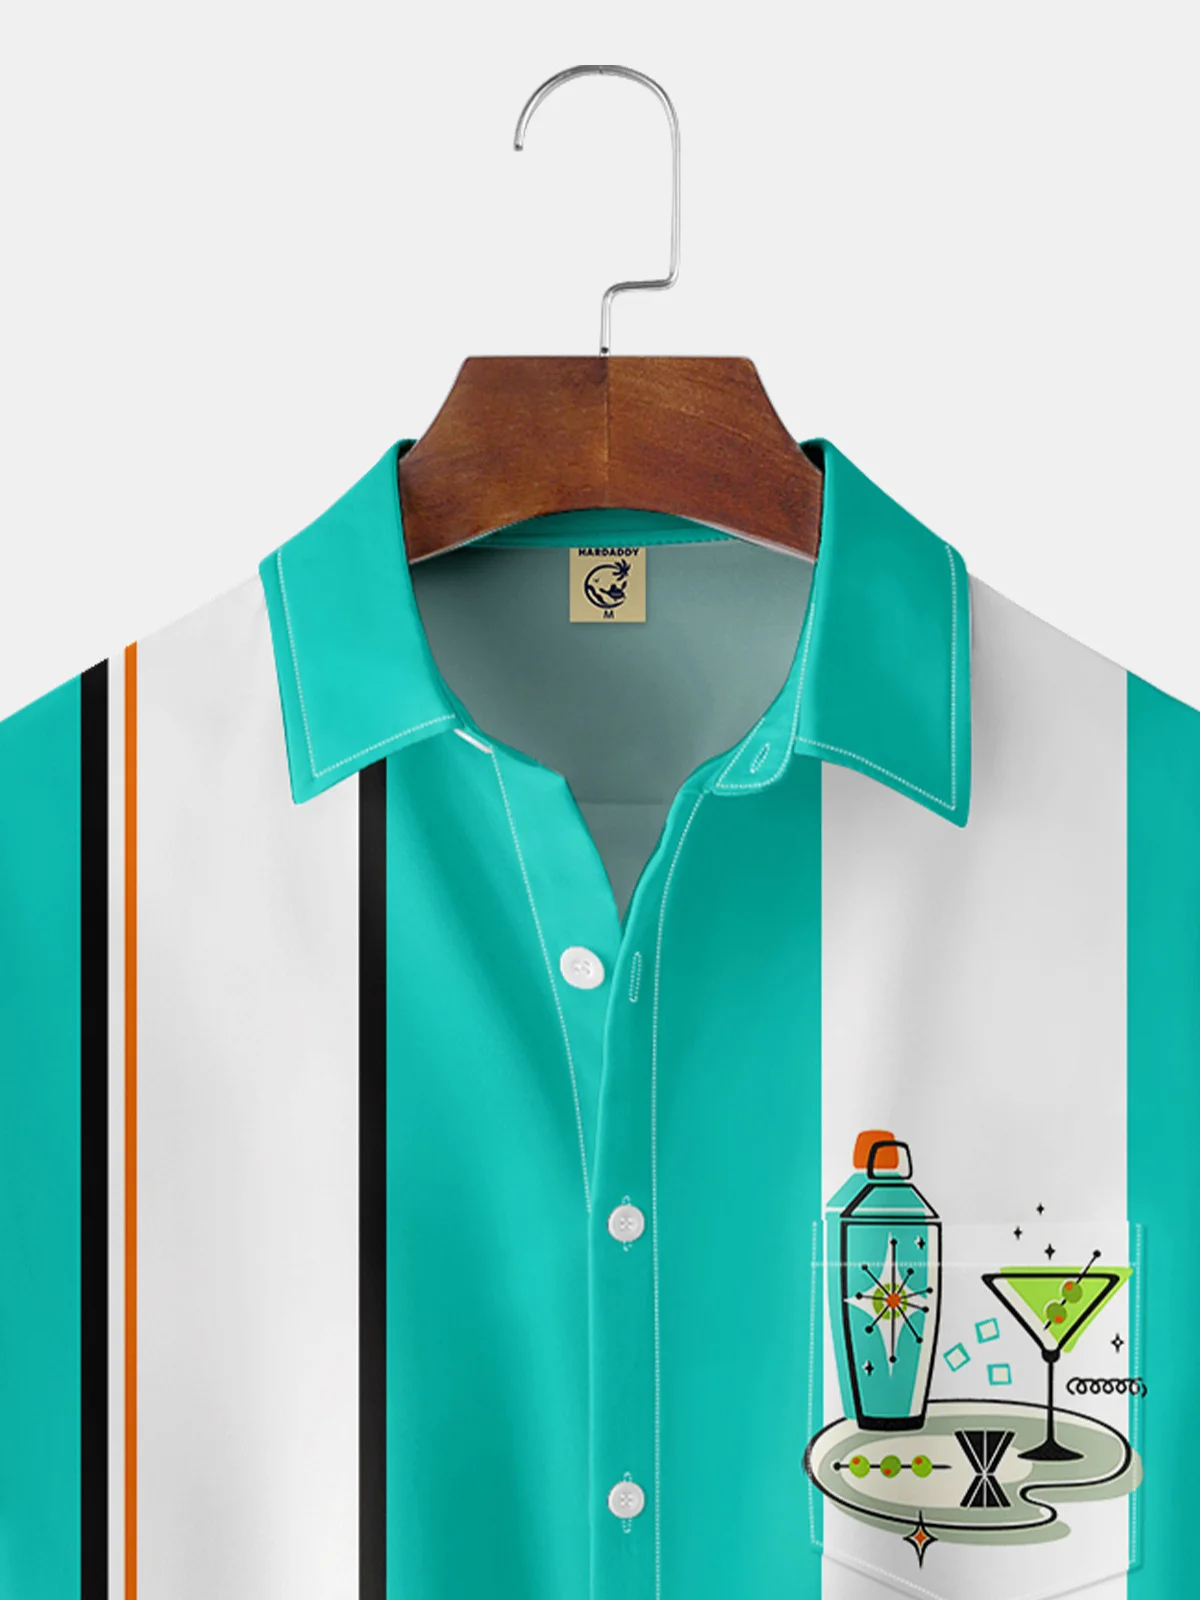 Hardaddy Medieval Cocktail Chest Pocket Short Sleeve Bowling Shirt